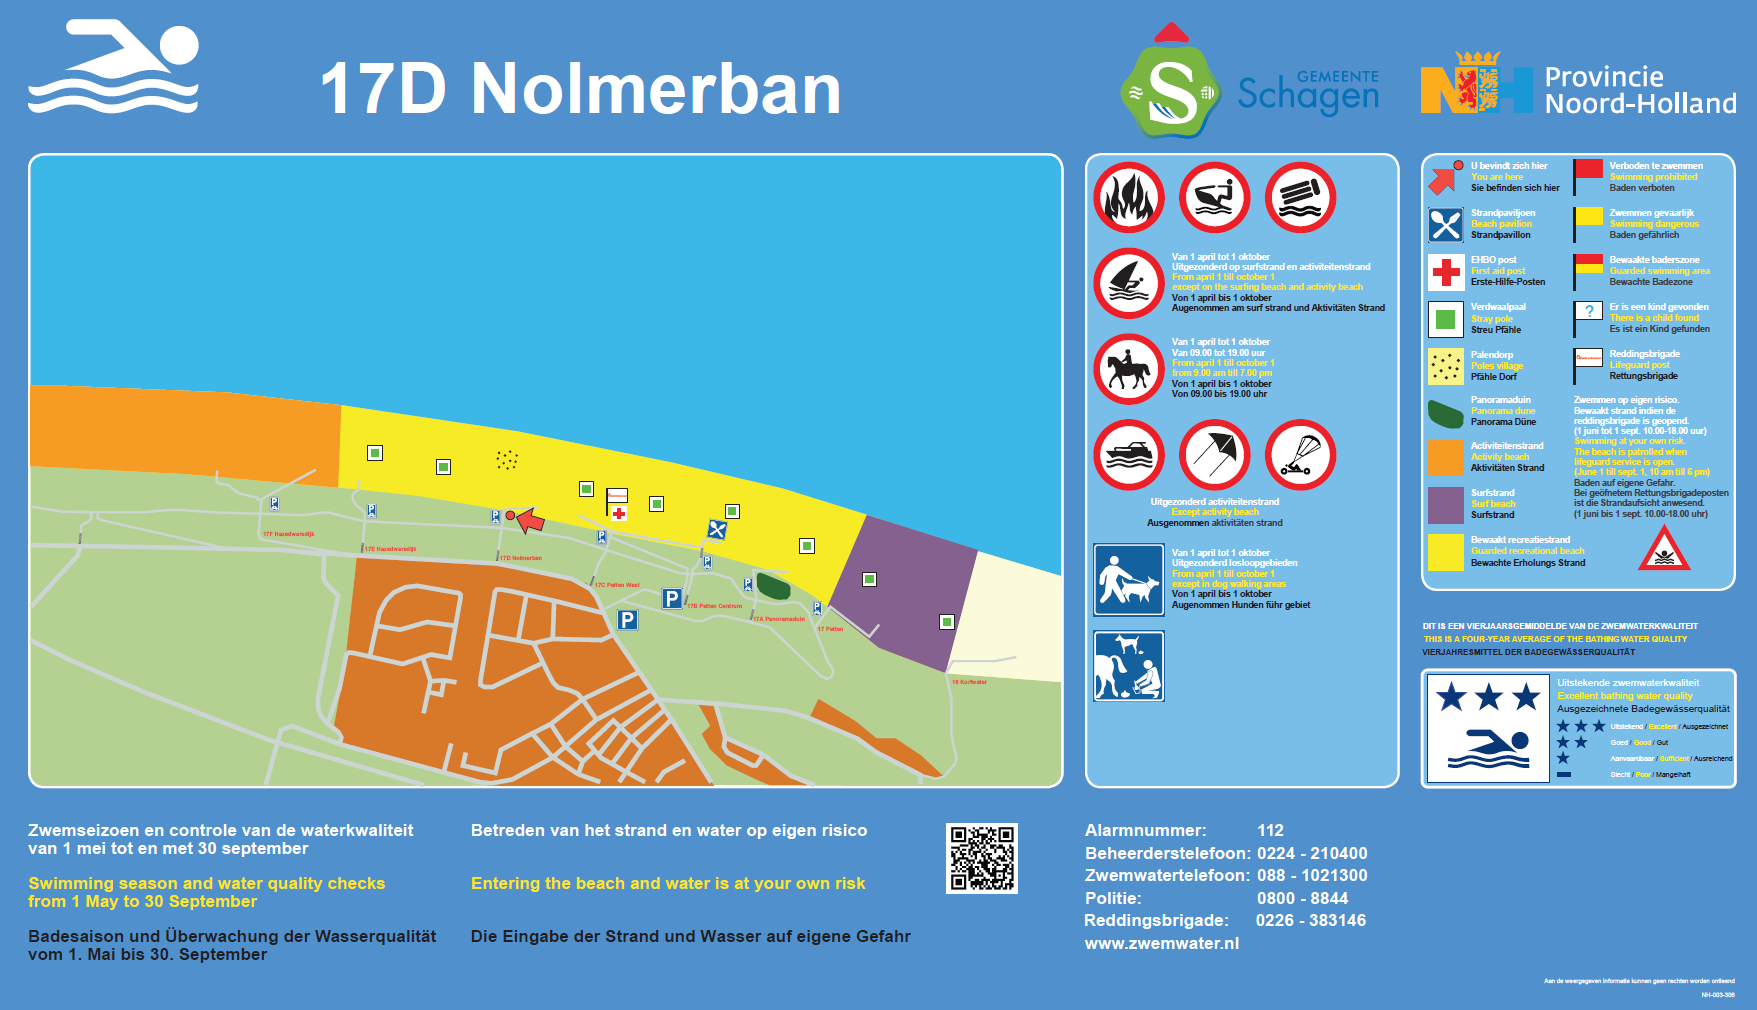 The information board at the swimming location Nolmerban